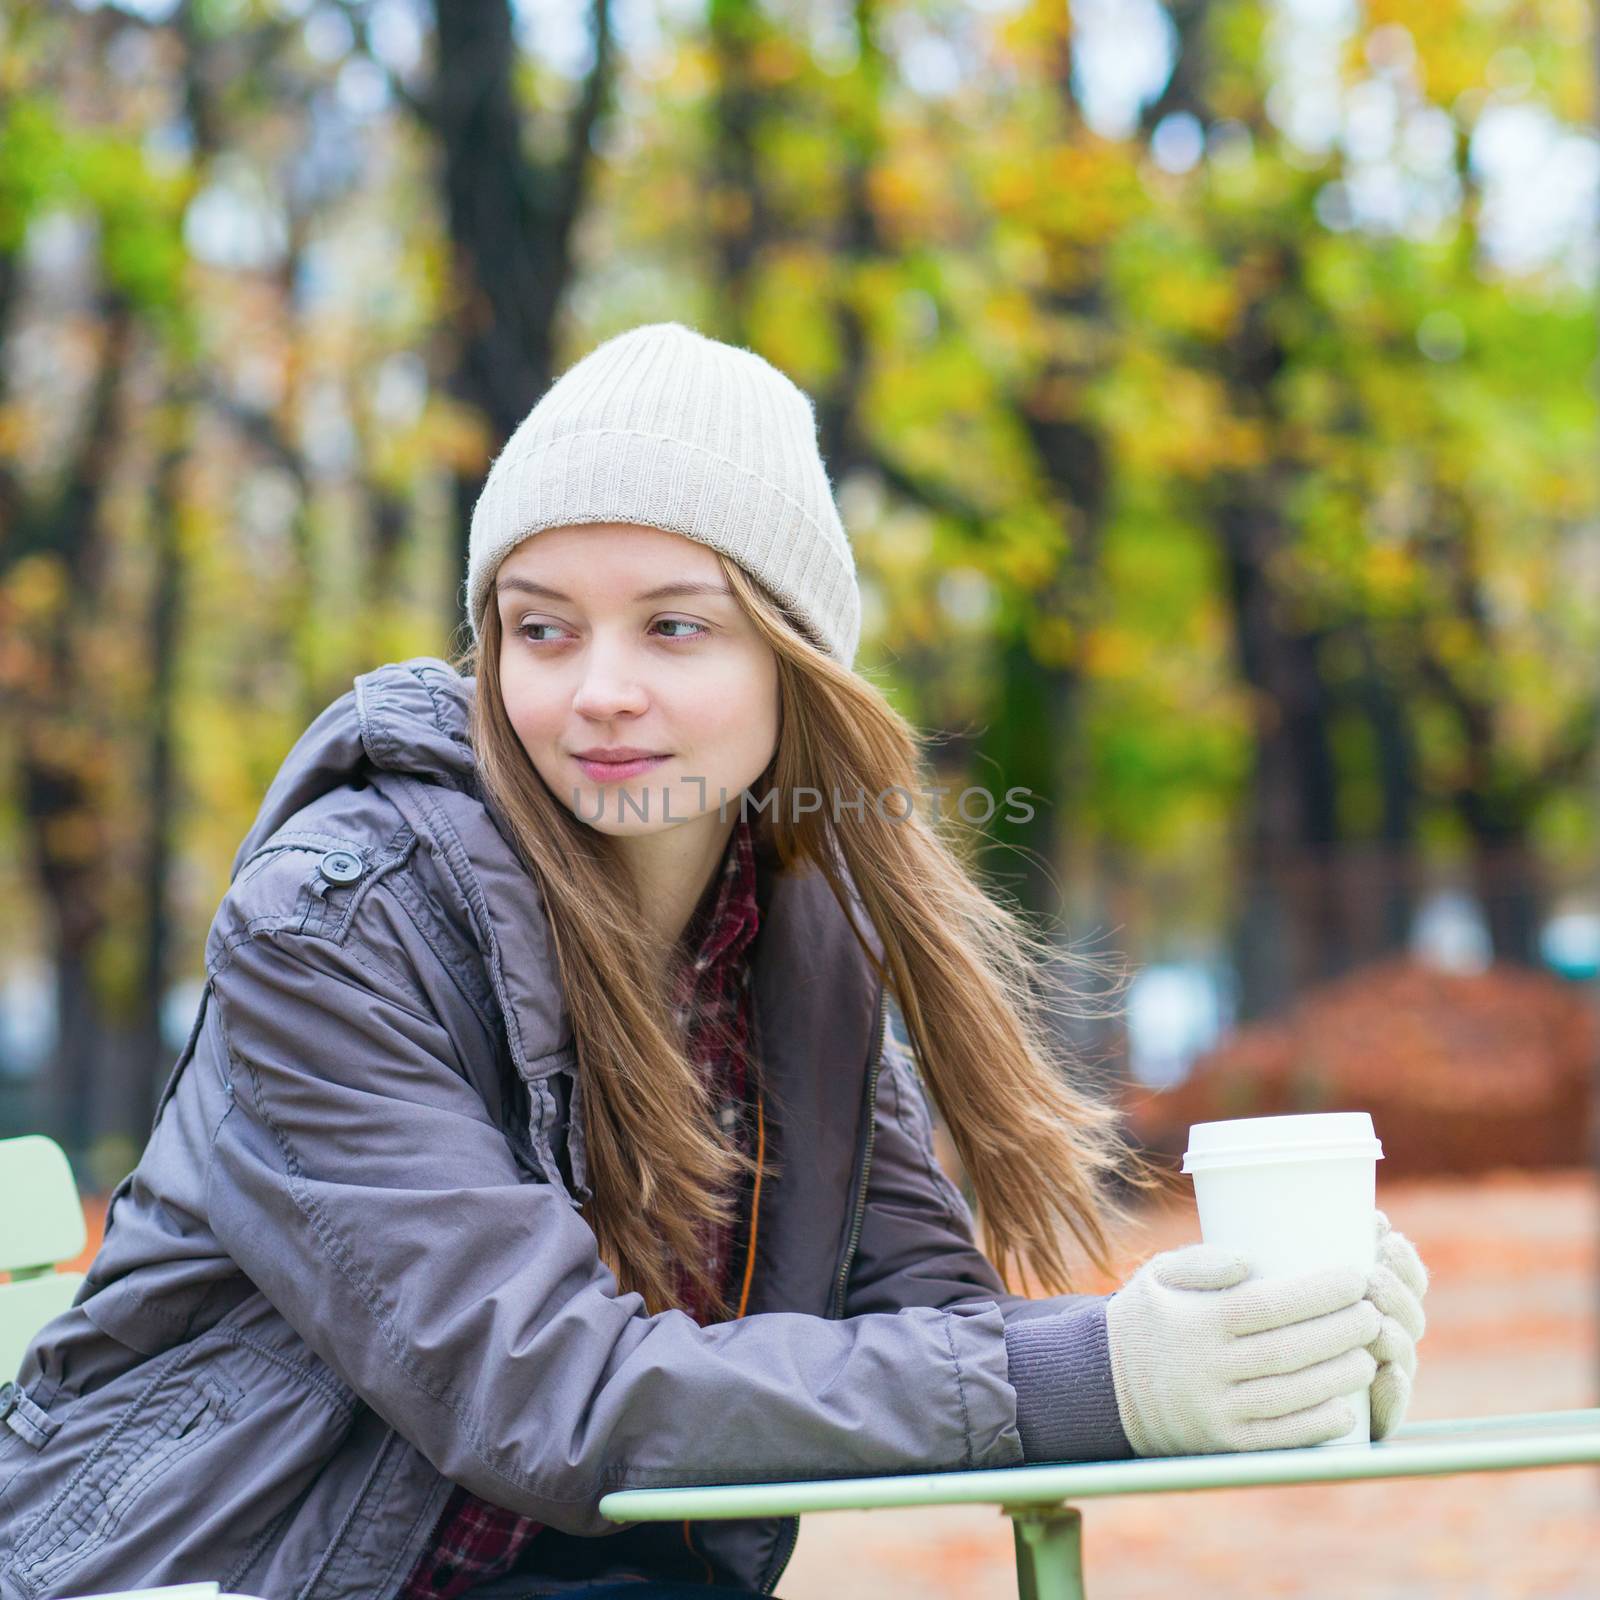 Young Parisian girl drinking coffee in the Luxembourg garden on a fall day